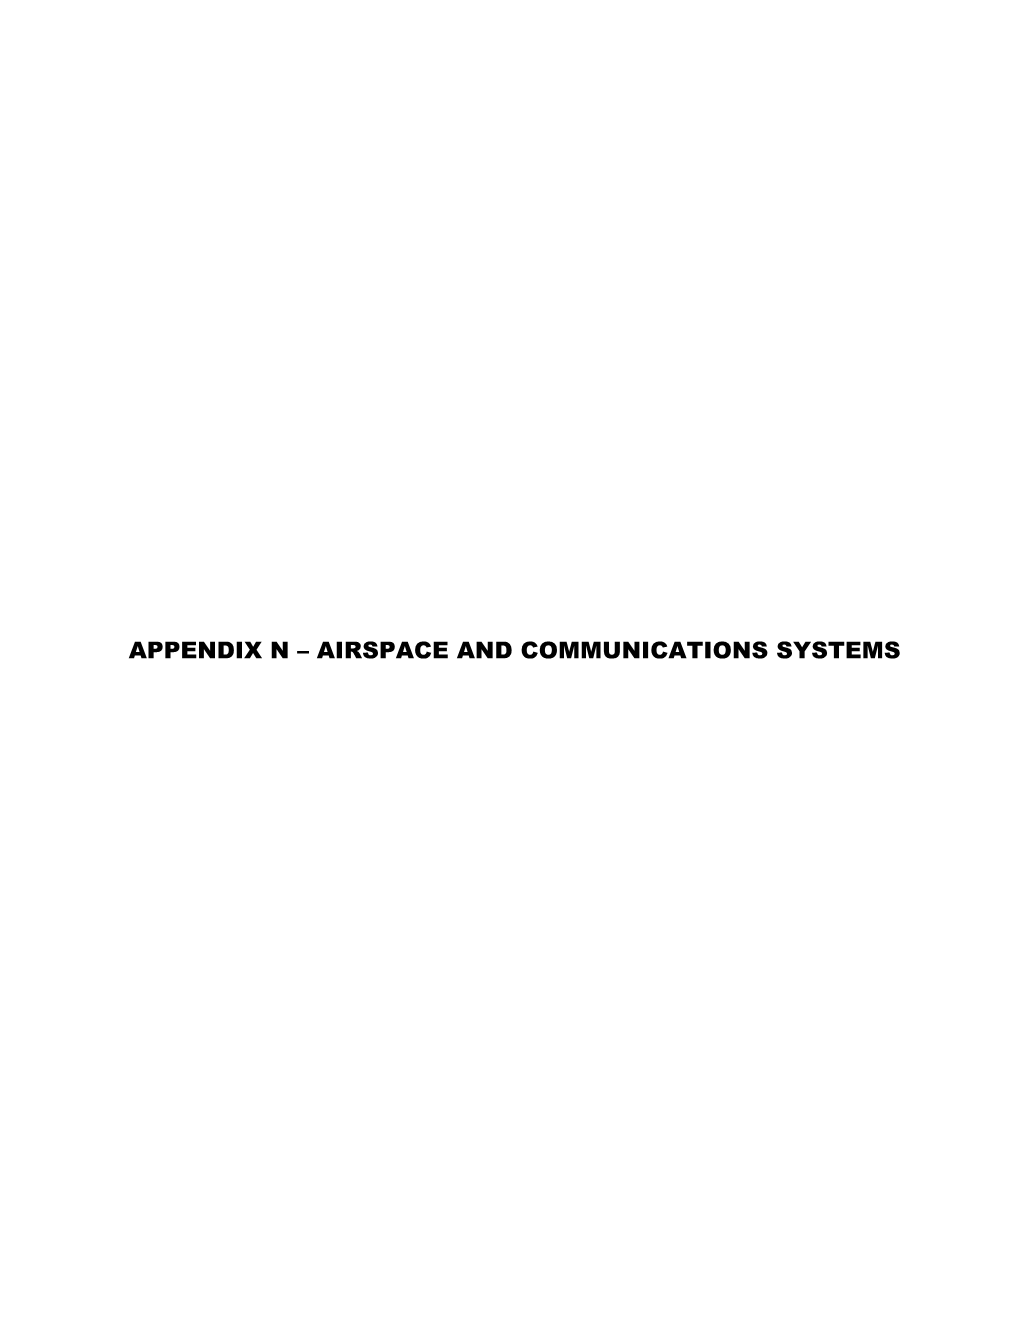 Appendix N – Airspace and Communications Systems